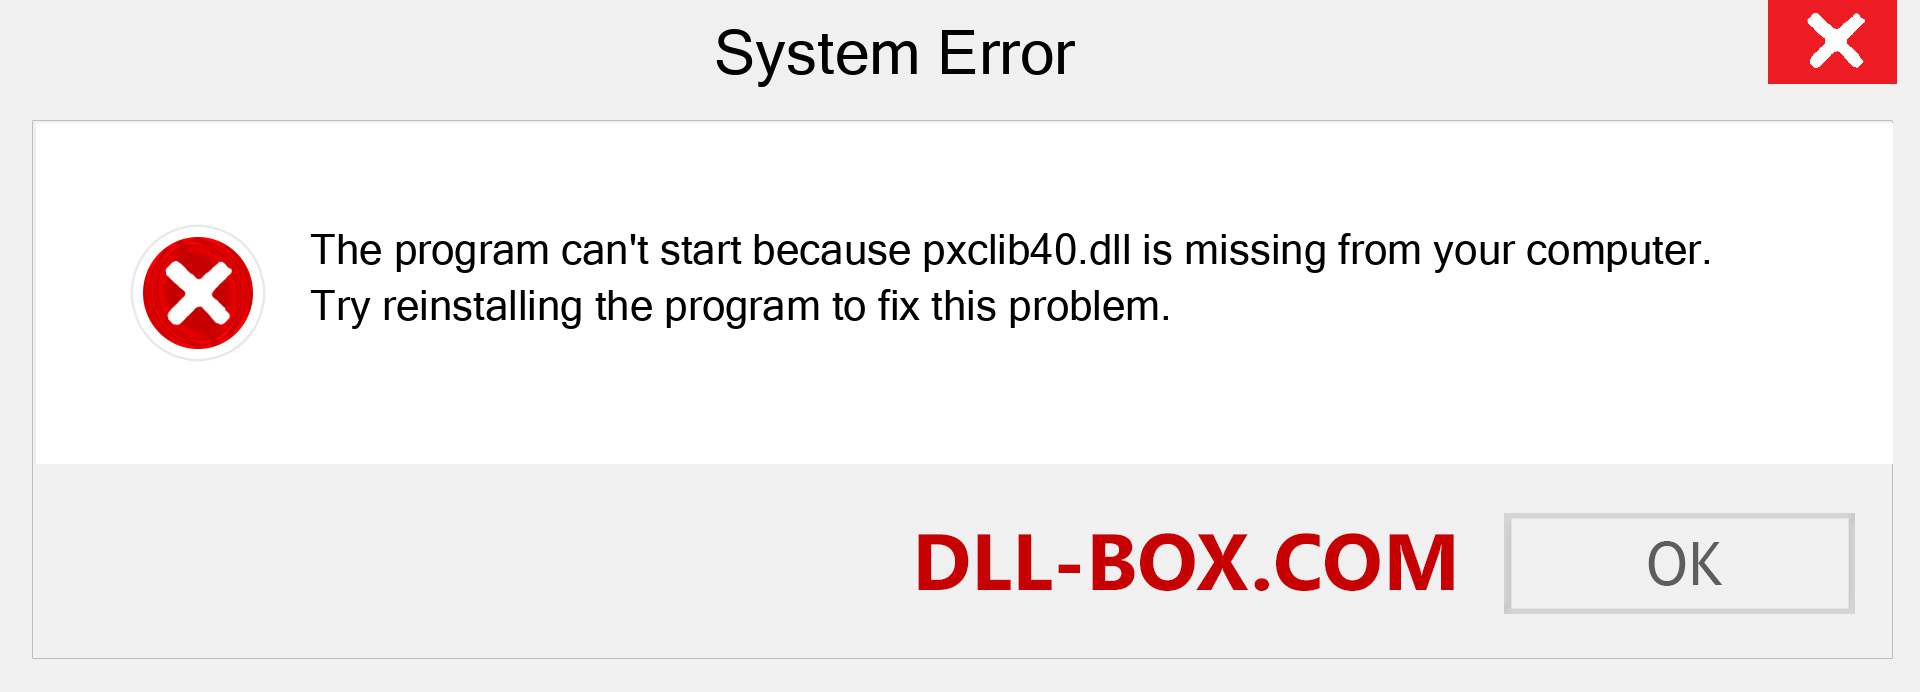  pxclib40.dll file is missing?. Download for Windows 7, 8, 10 - Fix  pxclib40 dll Missing Error on Windows, photos, images